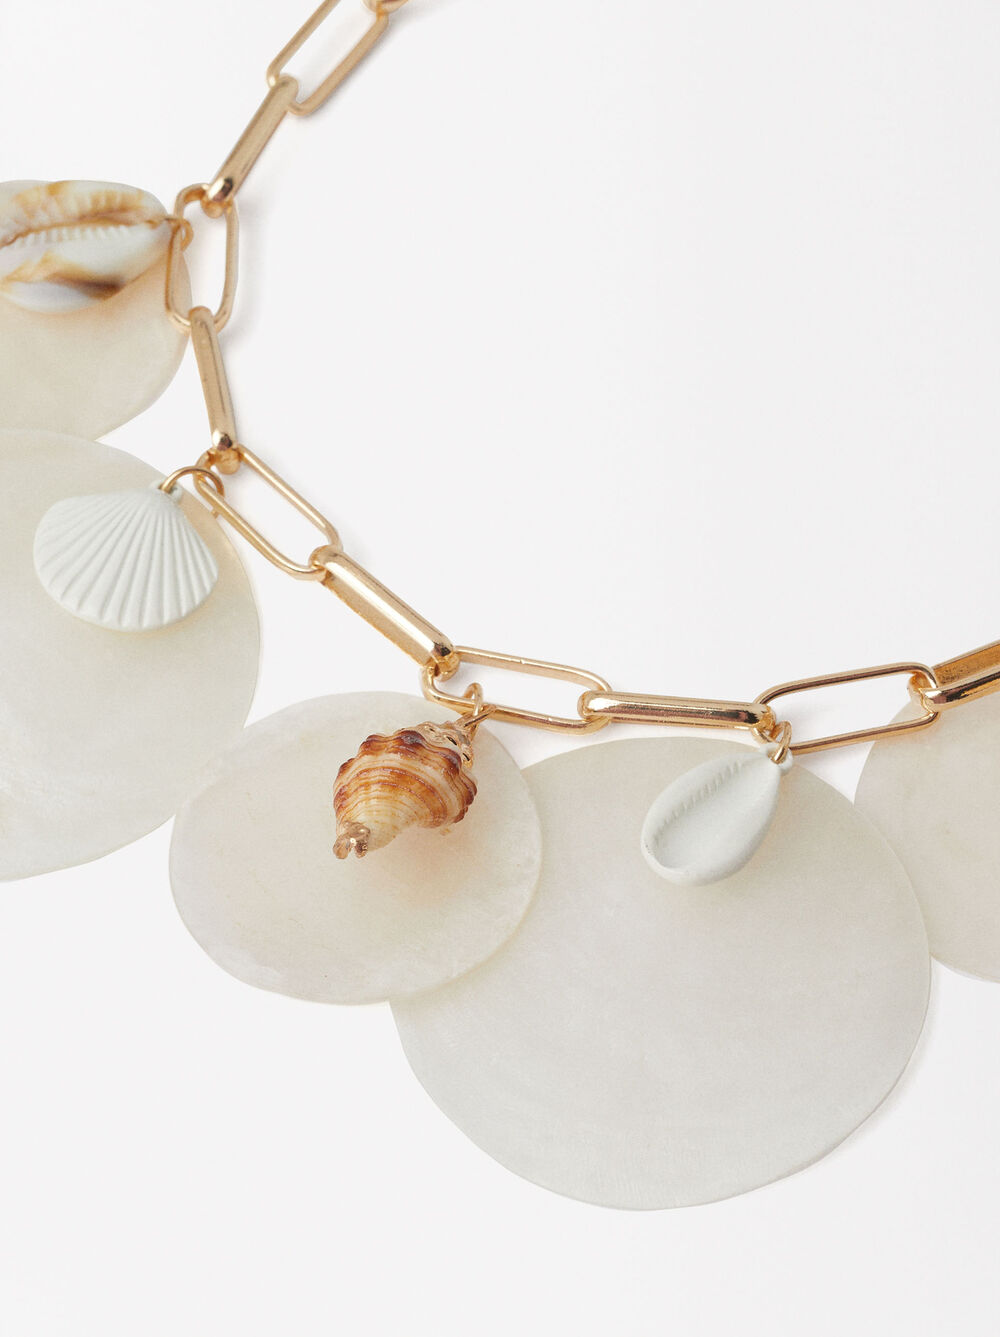 Golden Necklace With Shells